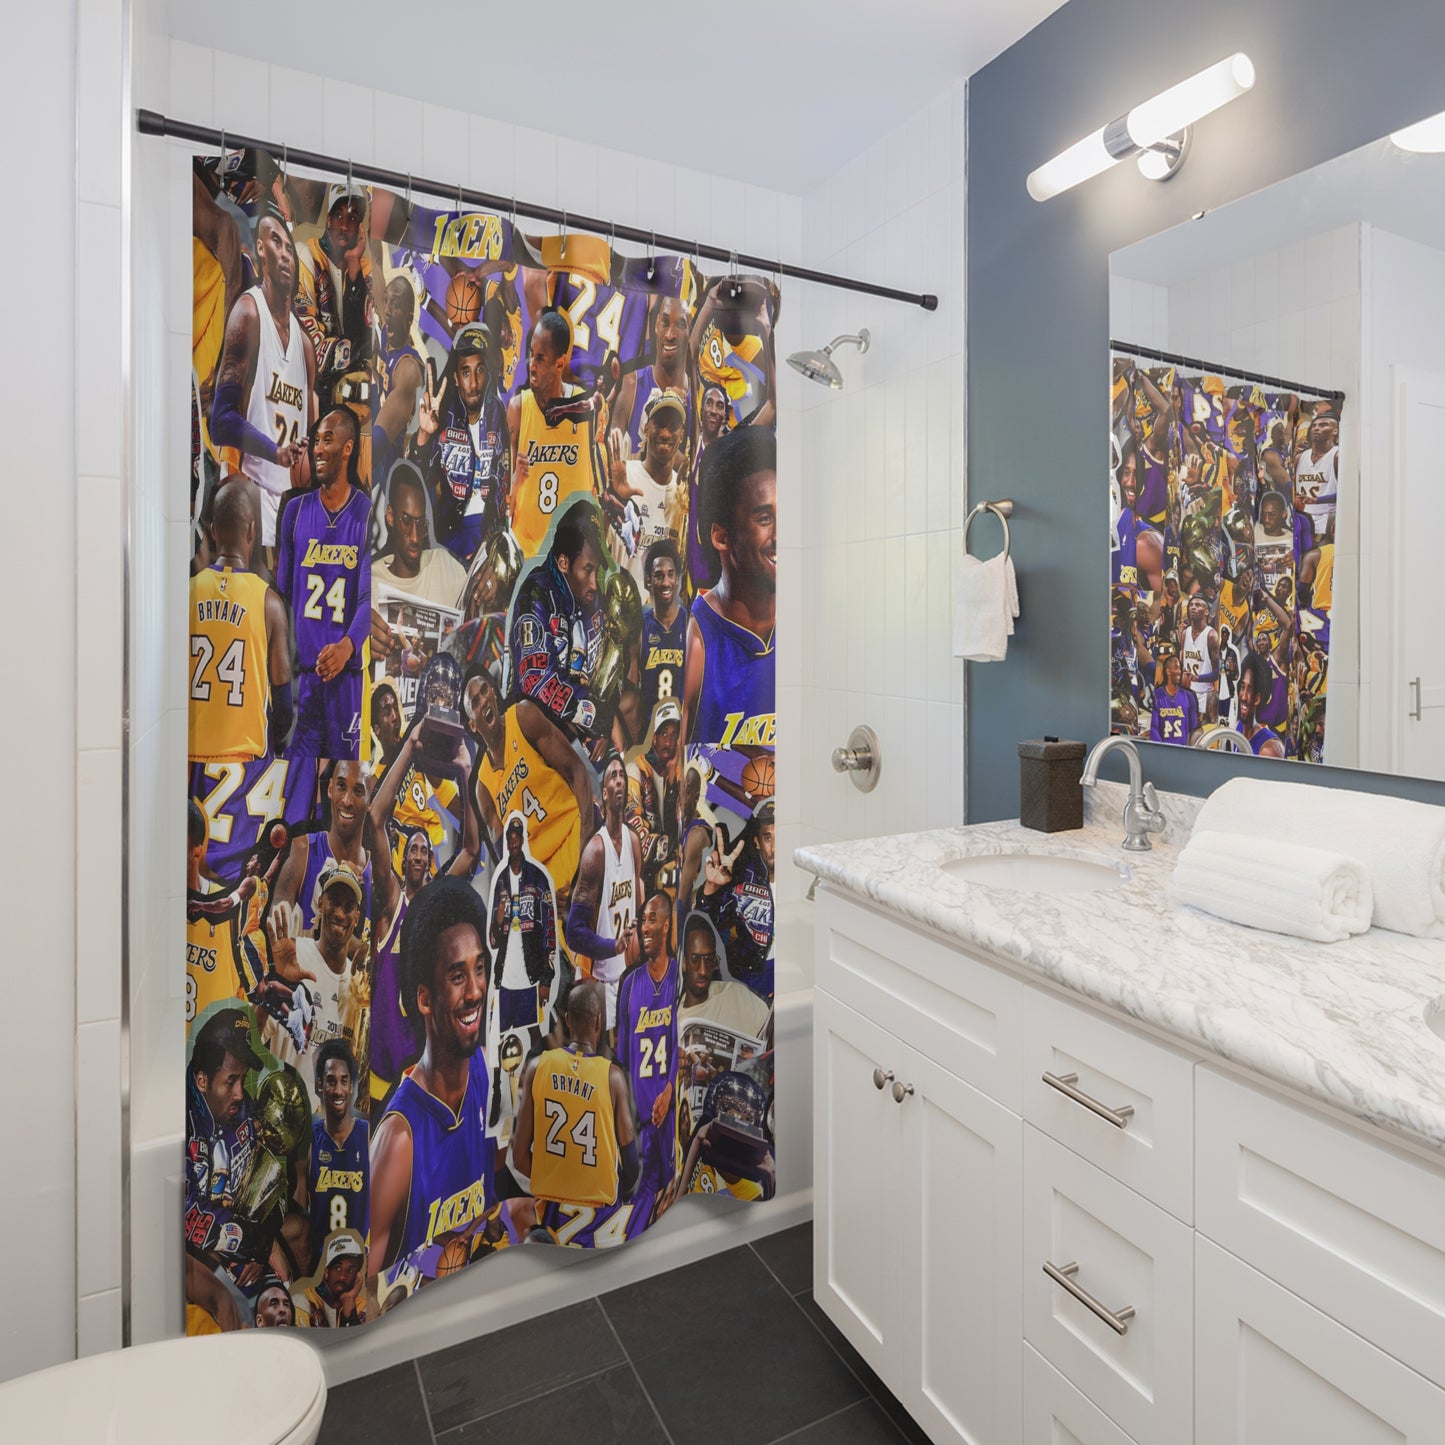 Kobe Bryant Career Moments Photo Collage Shower Curtain